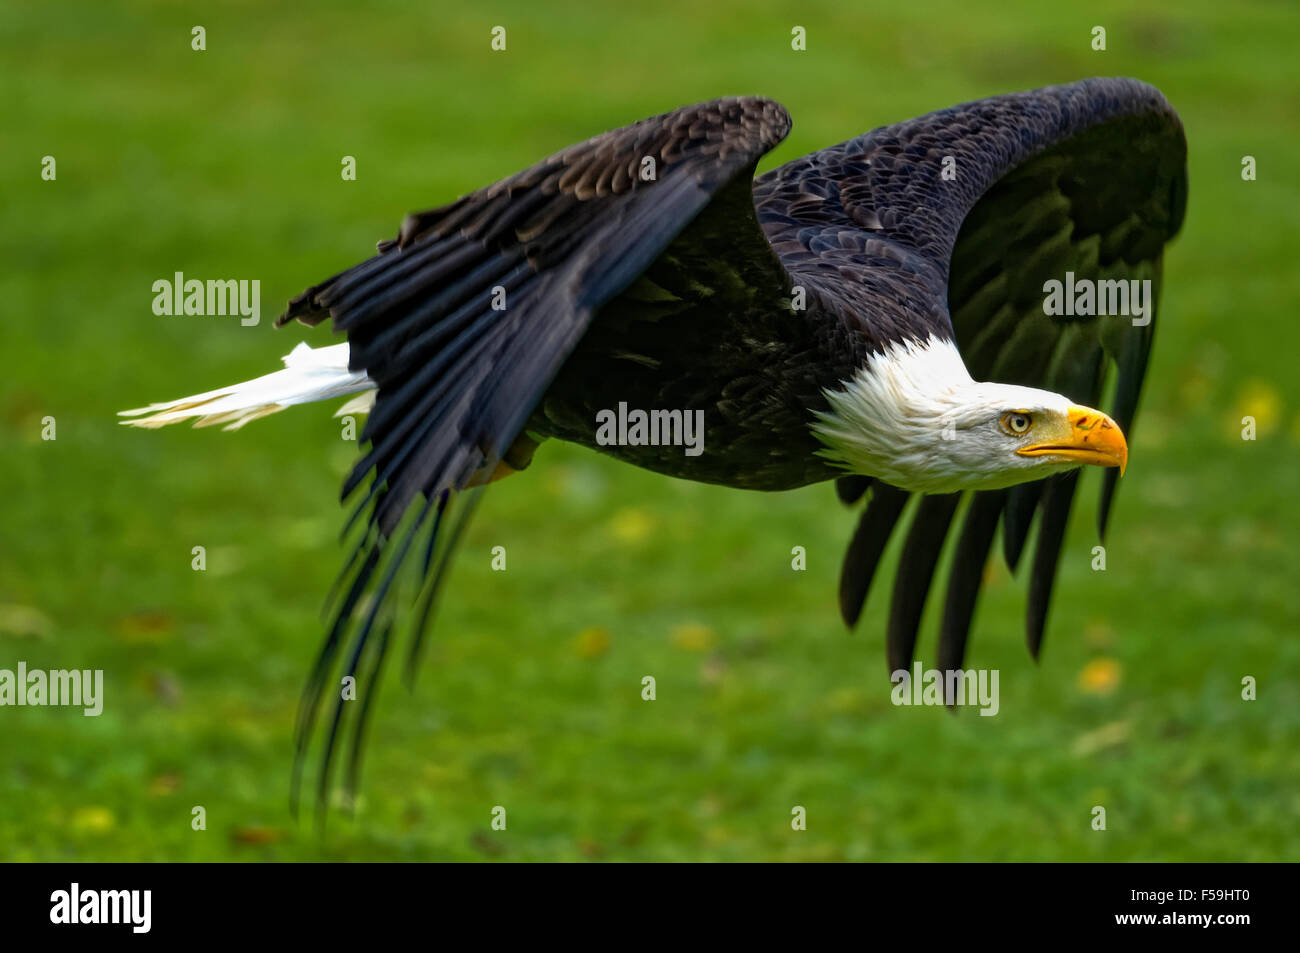 Bald Eagle flying free over meadow, wings spread. Stock Photo